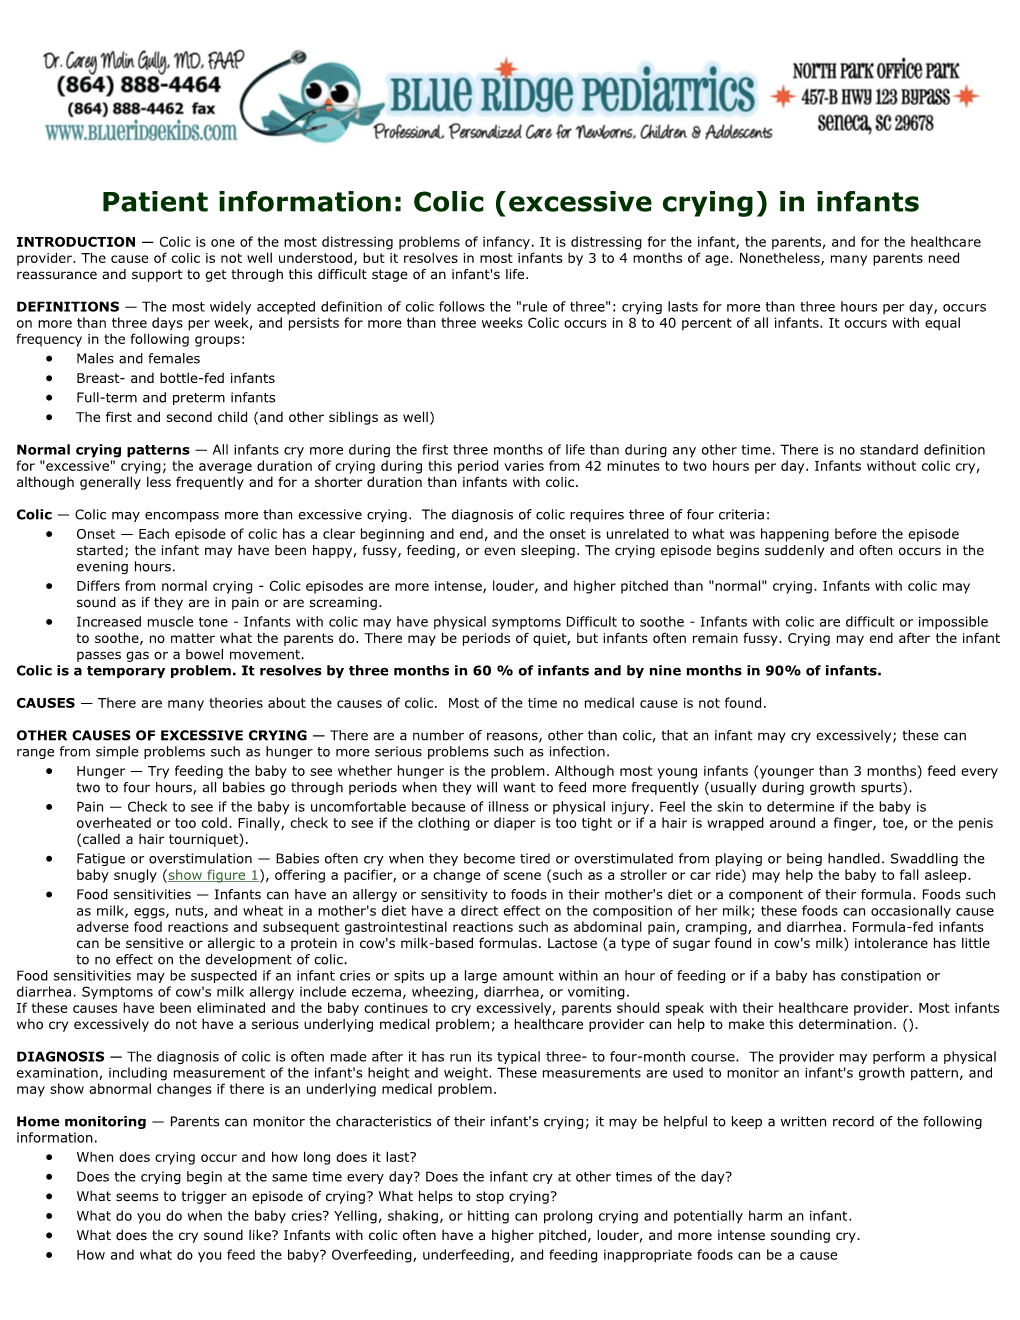 Colic (Excessive Crying) in Infants